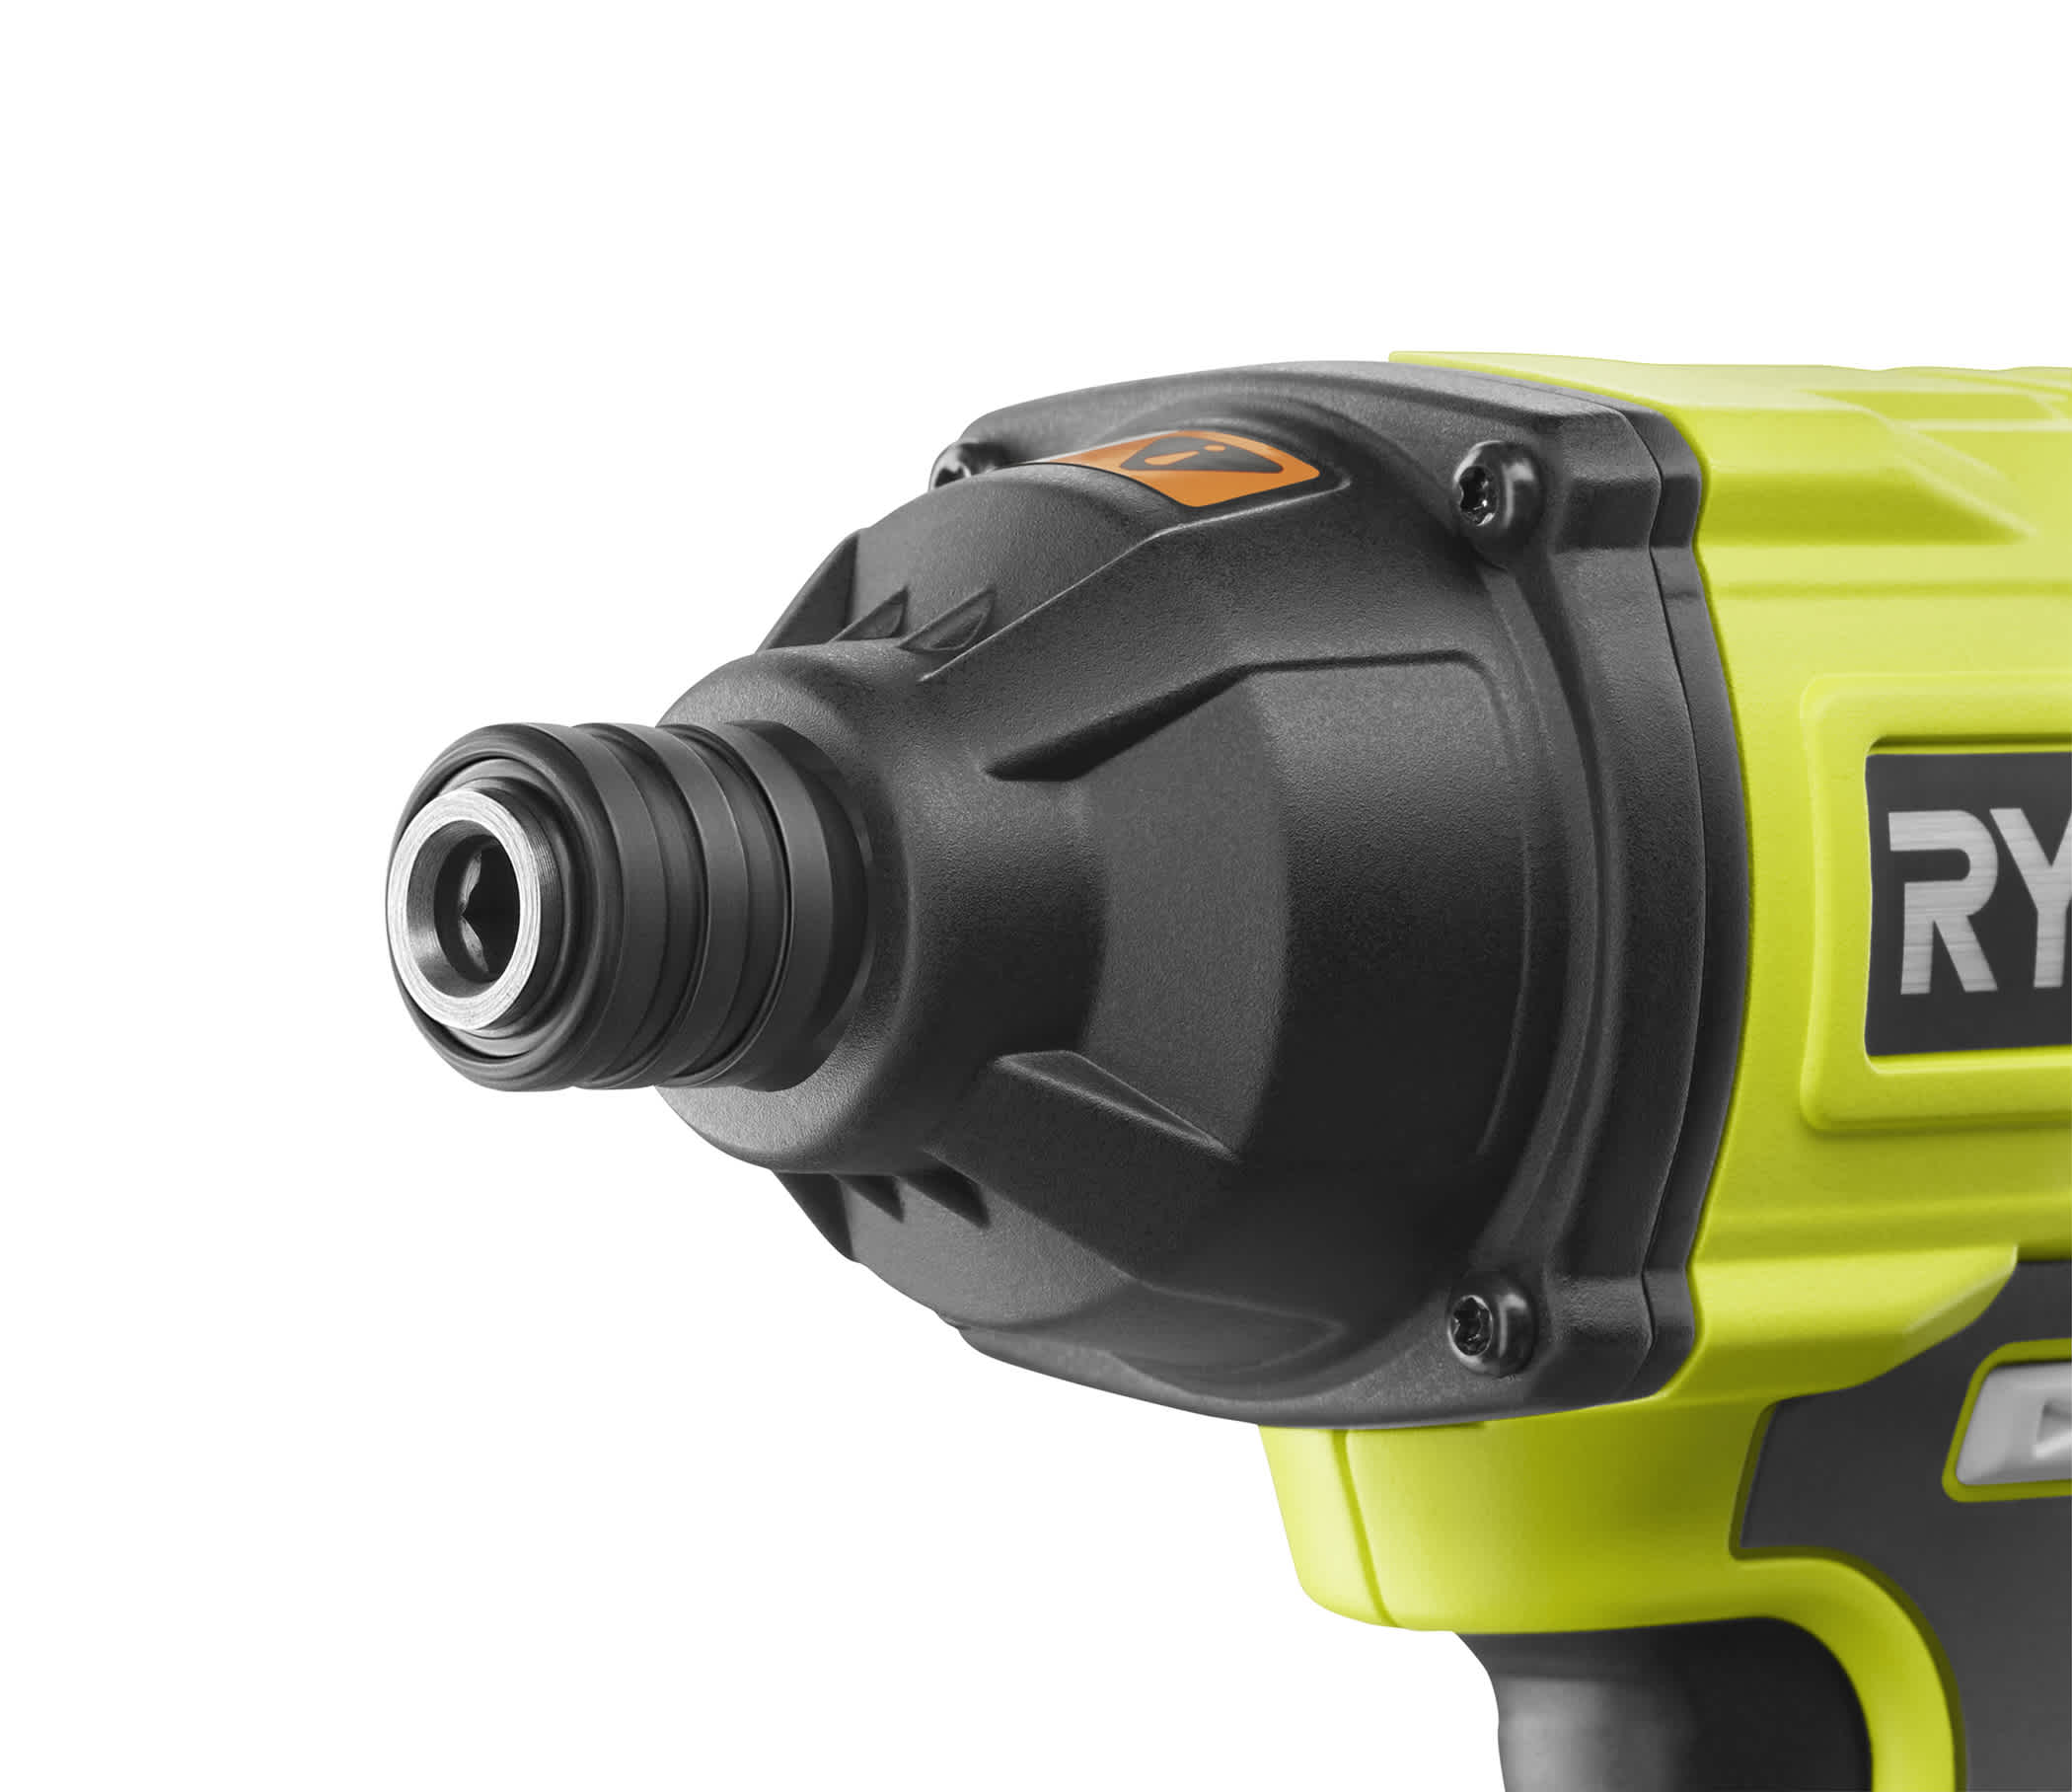 Product Features Image for 18V ONE+™ IMPACT DRIVER KIT WITH 2 BATTERIES.